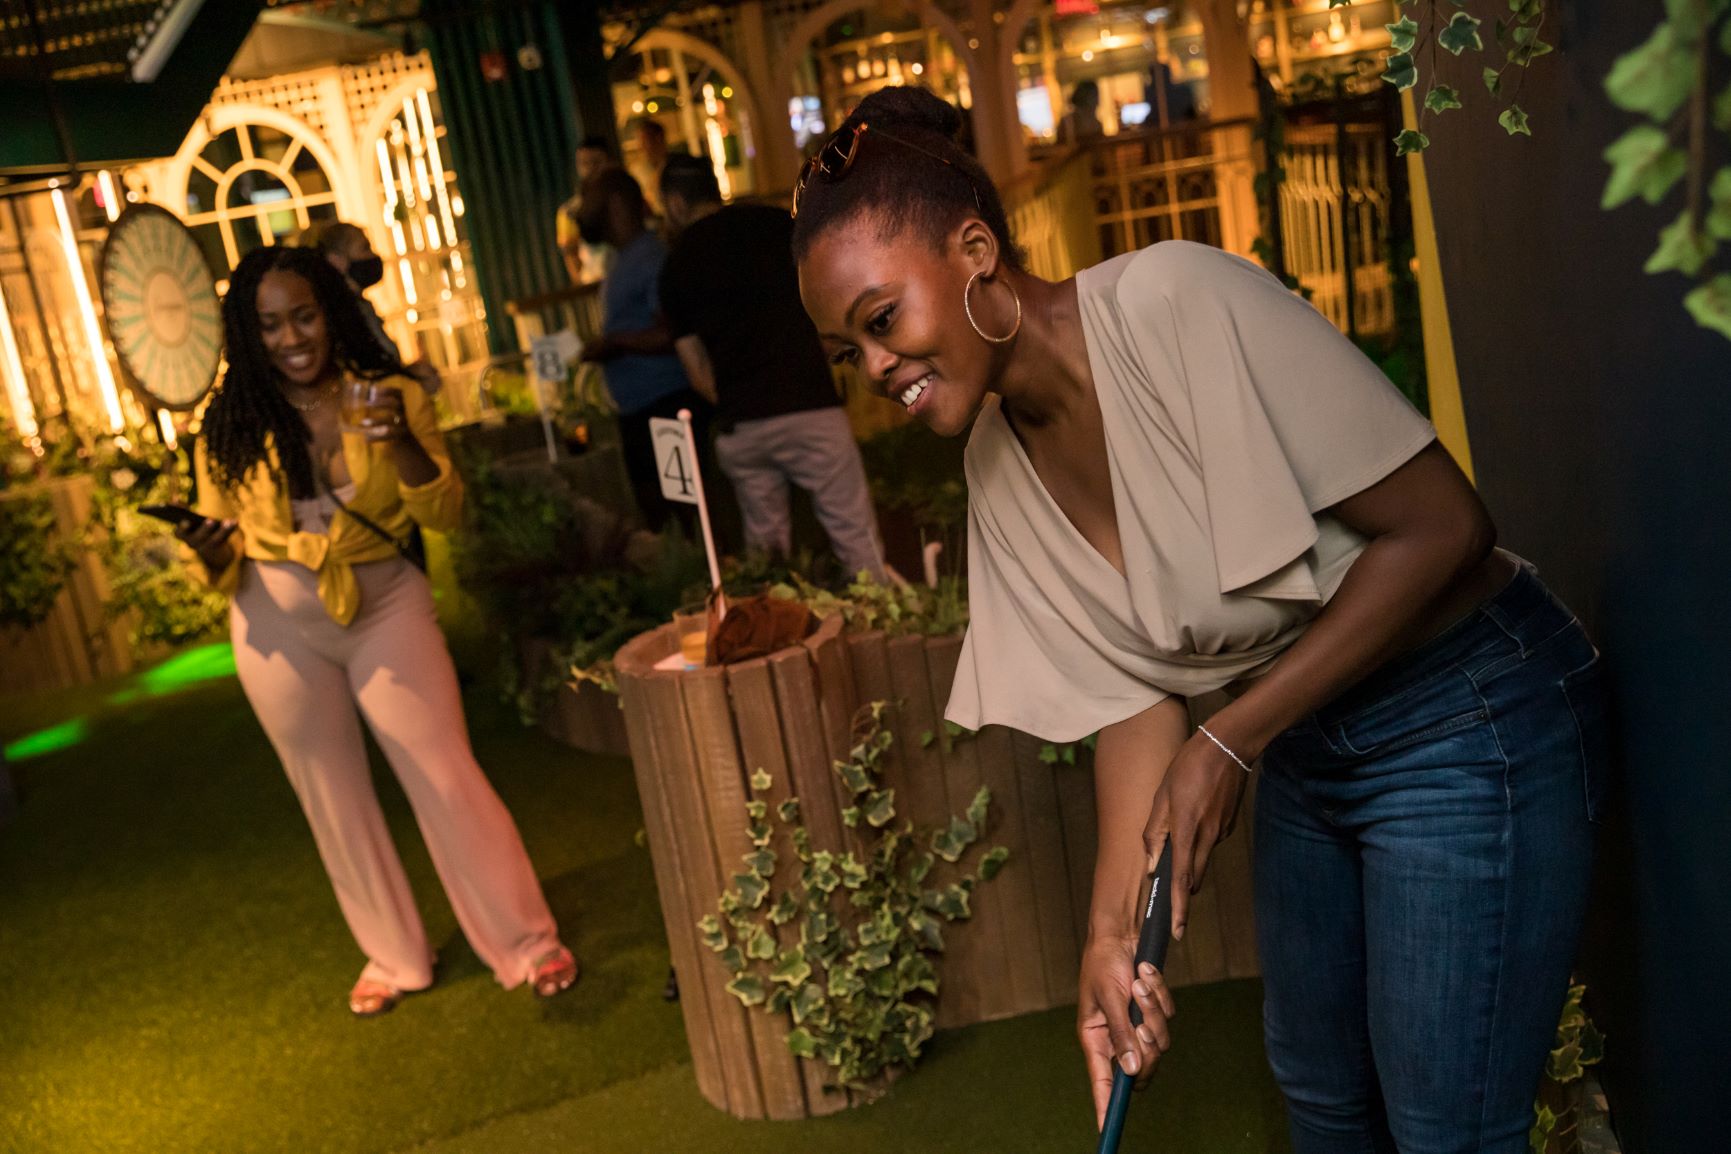 A young woman smiles, drink in hand, watching another young woman line up her shot on a crazy golf course.